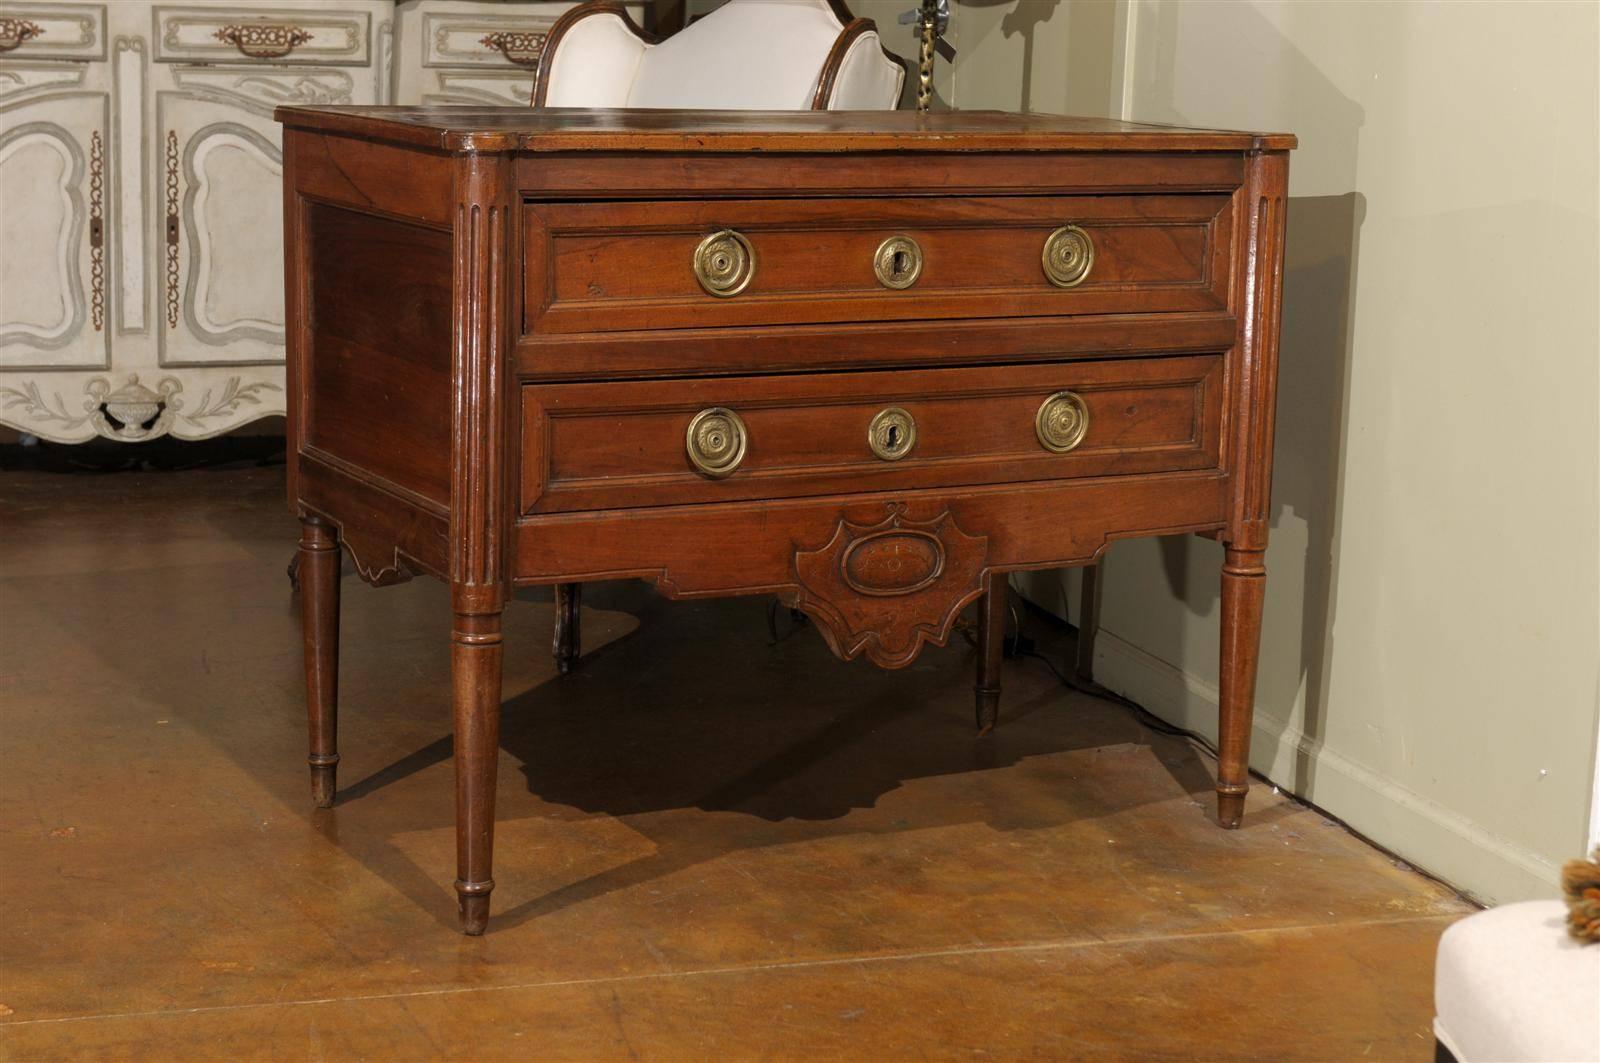 A French walnut Louis XVI style two-drawer commode from the 19th century. This French Louis XVI style walnut commode features a rectangular top with rounded corners in the front over two long dovetailed drawers with recessed panels. Each drawer is